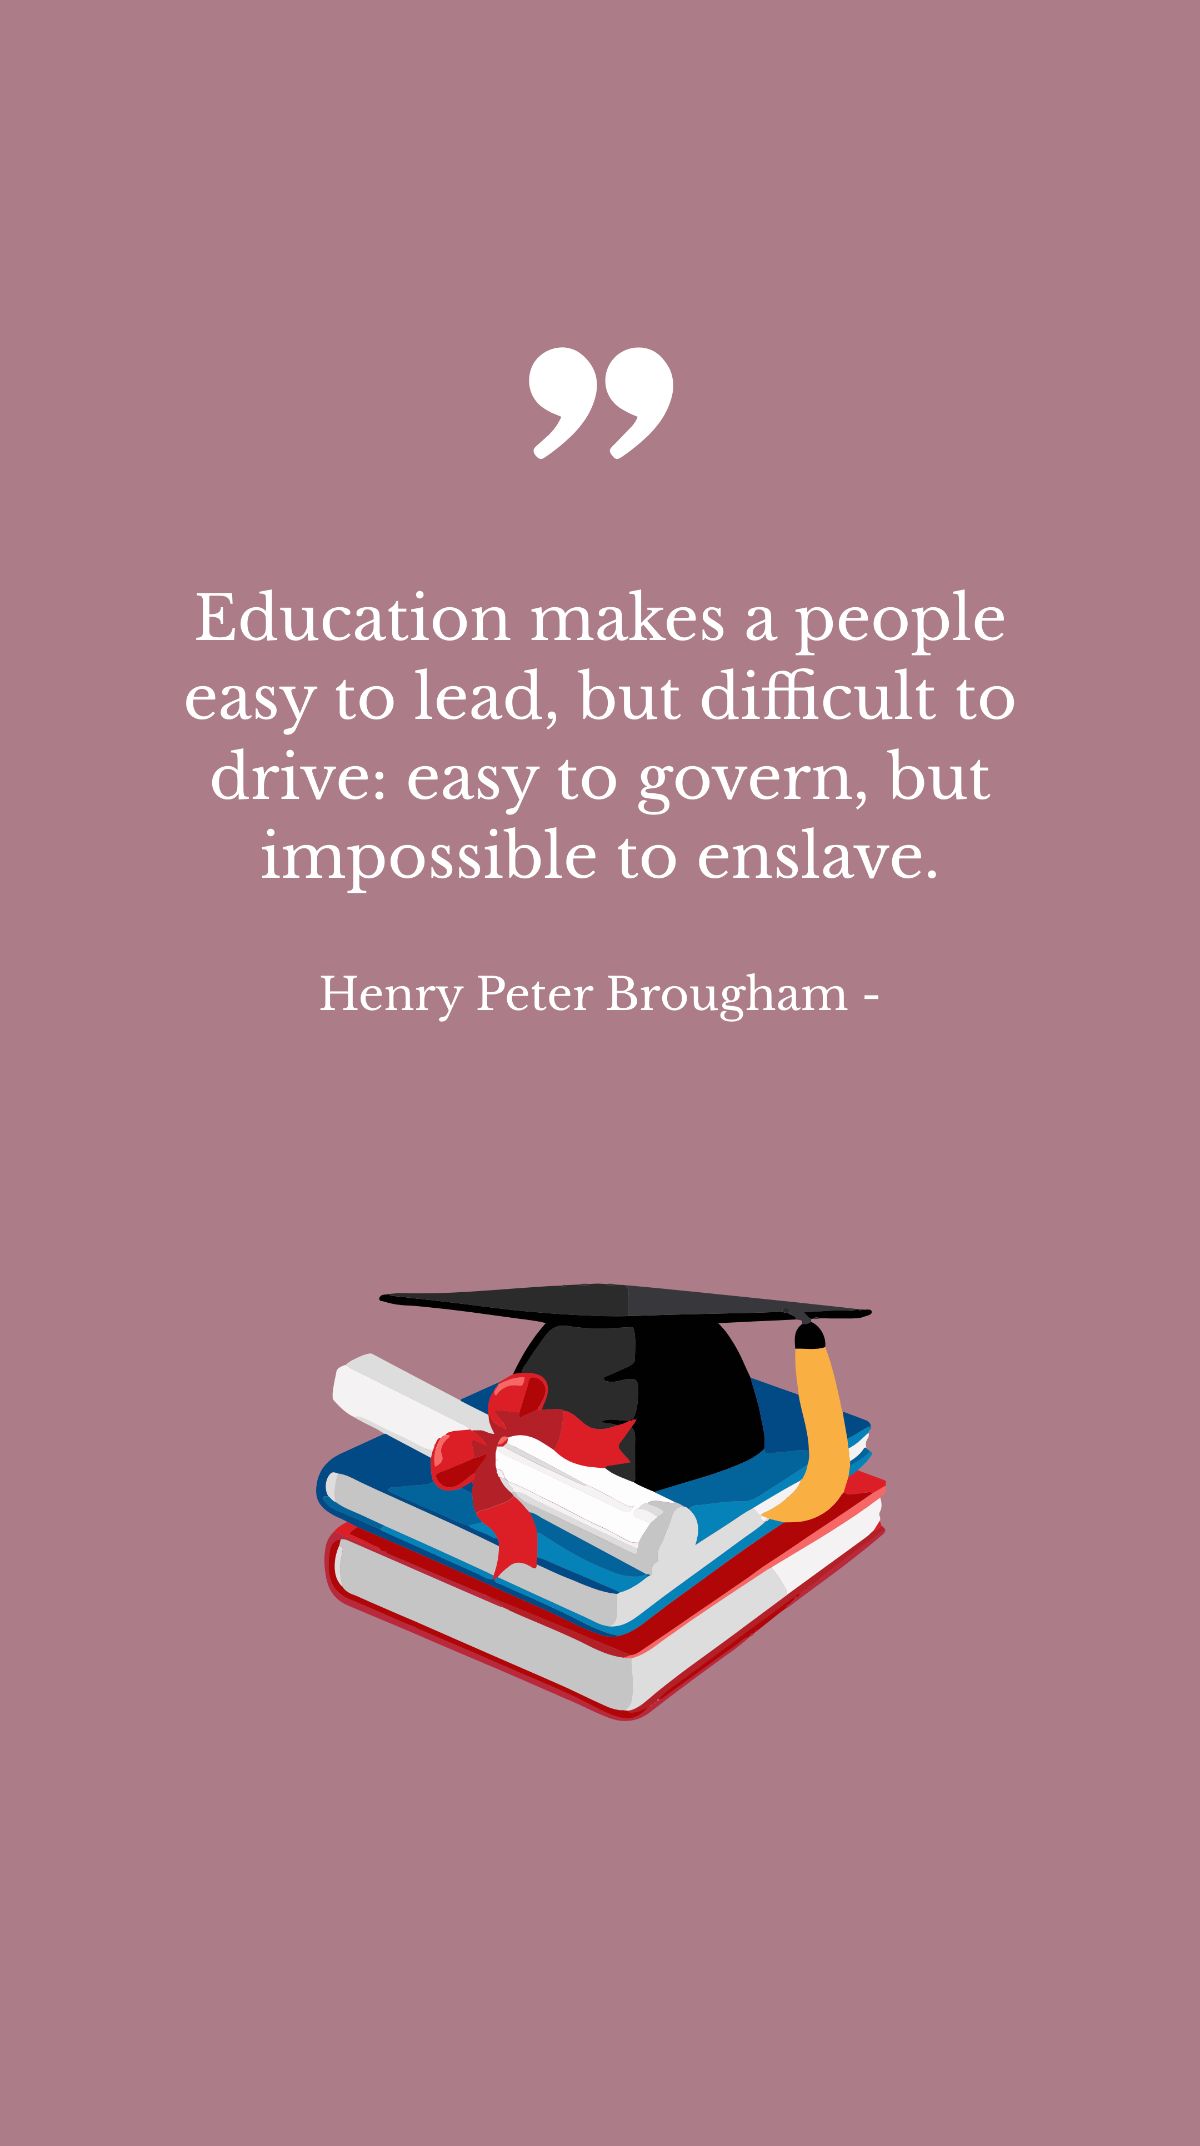 Free Henry Peter Brougham - Education makes a people easy to lead, but difficult to drive: easy to govern, but impossible to enslave. Template